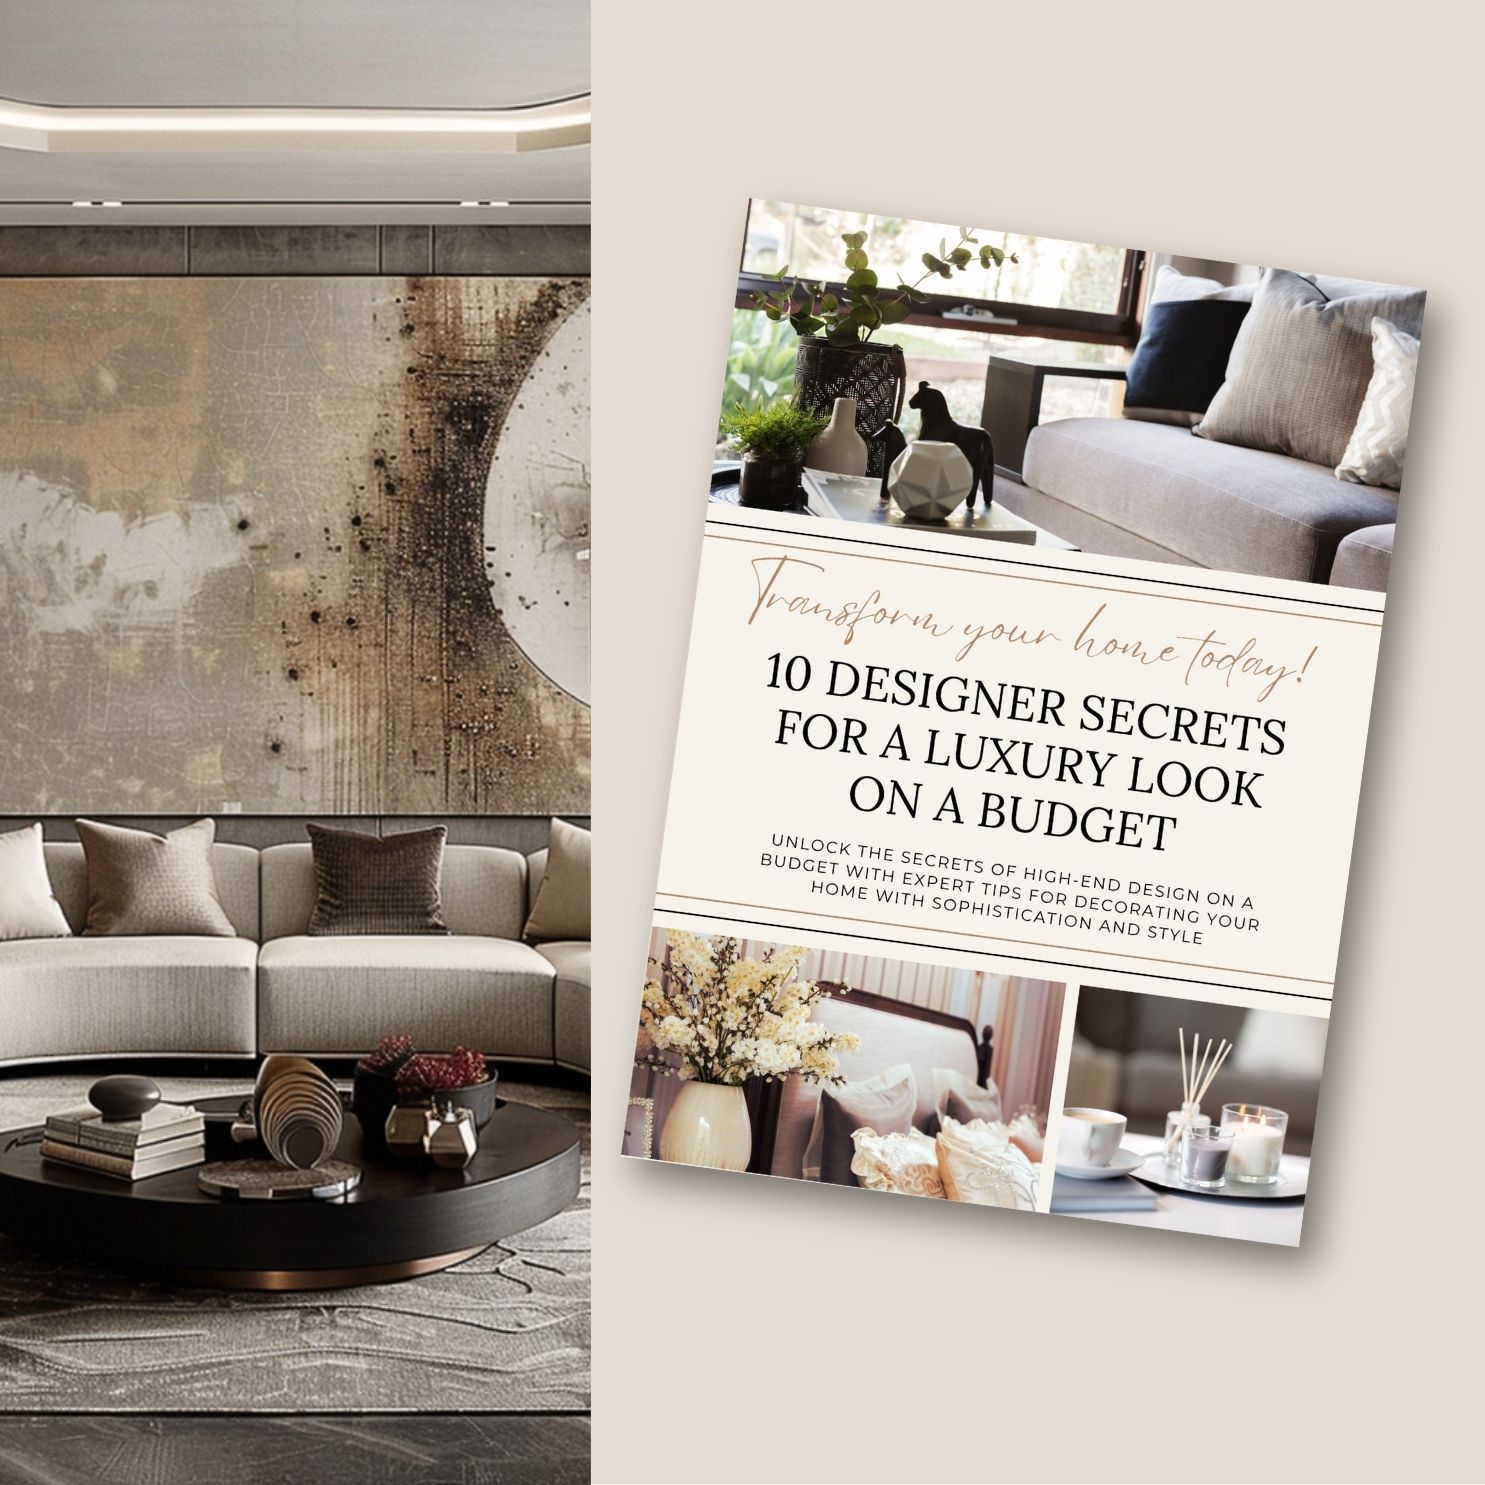 luxury home decorating on a budget free guide